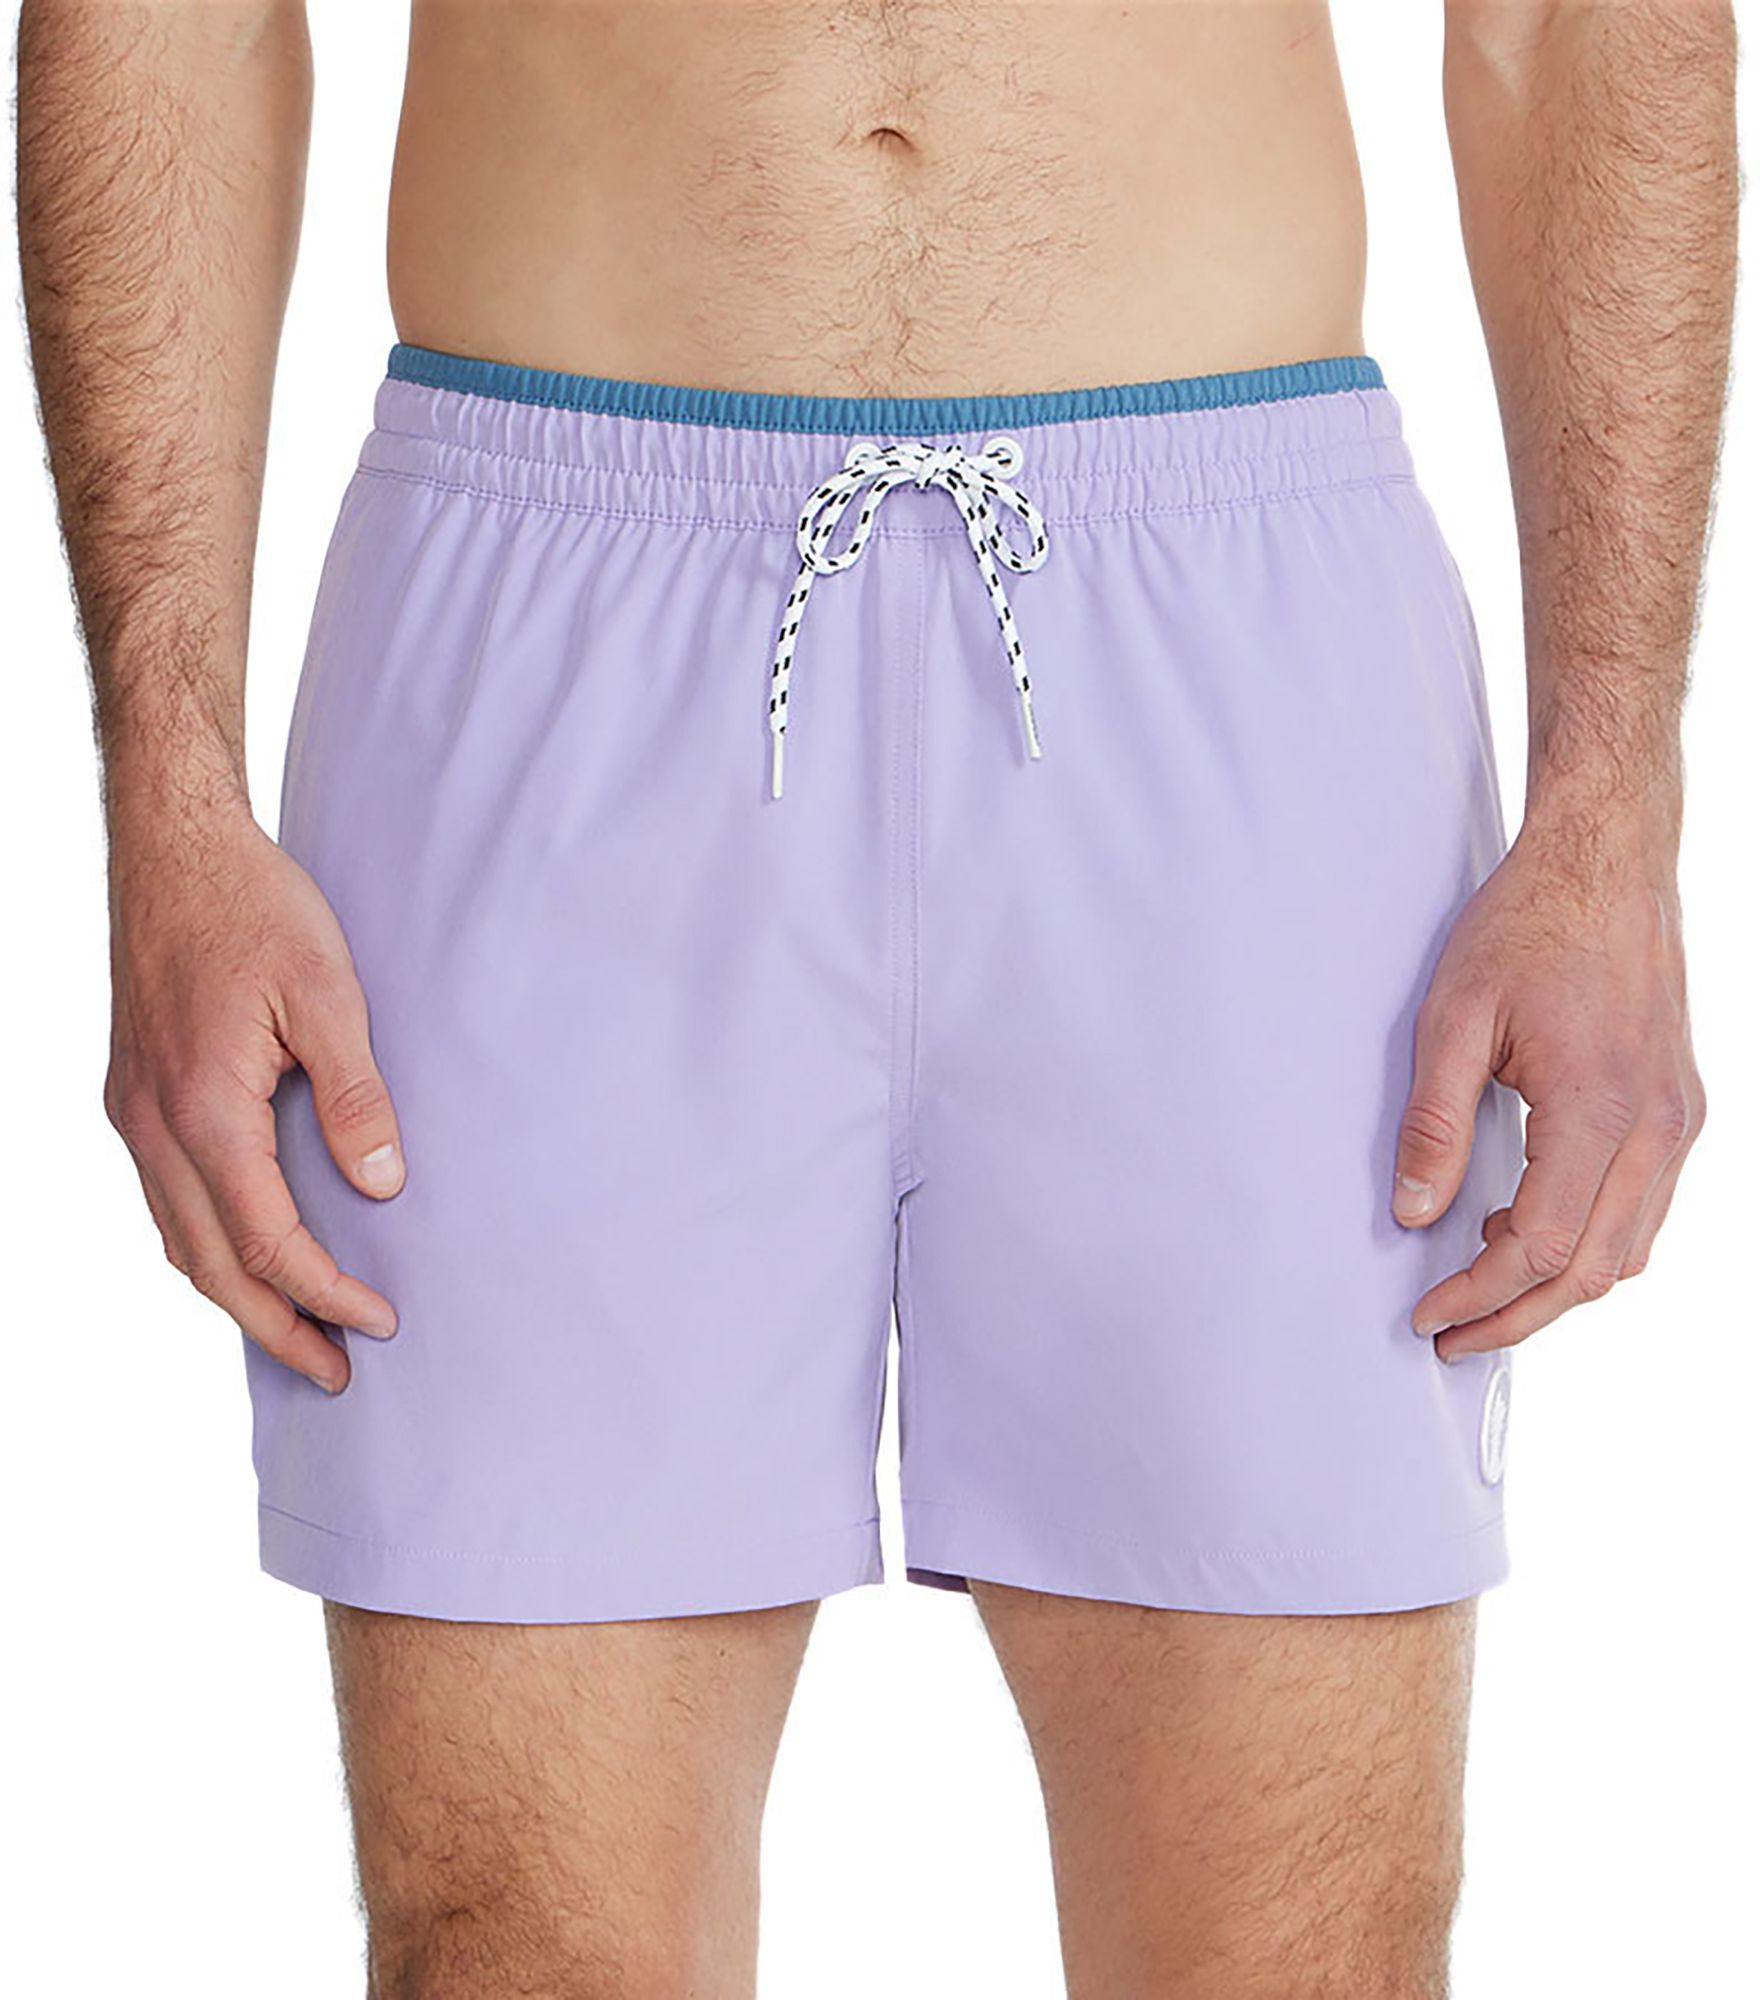 Photos - Swimwear chubbies Men's Classic 5.5" Swim Trunks, Large, Lovenders | Father's Day G